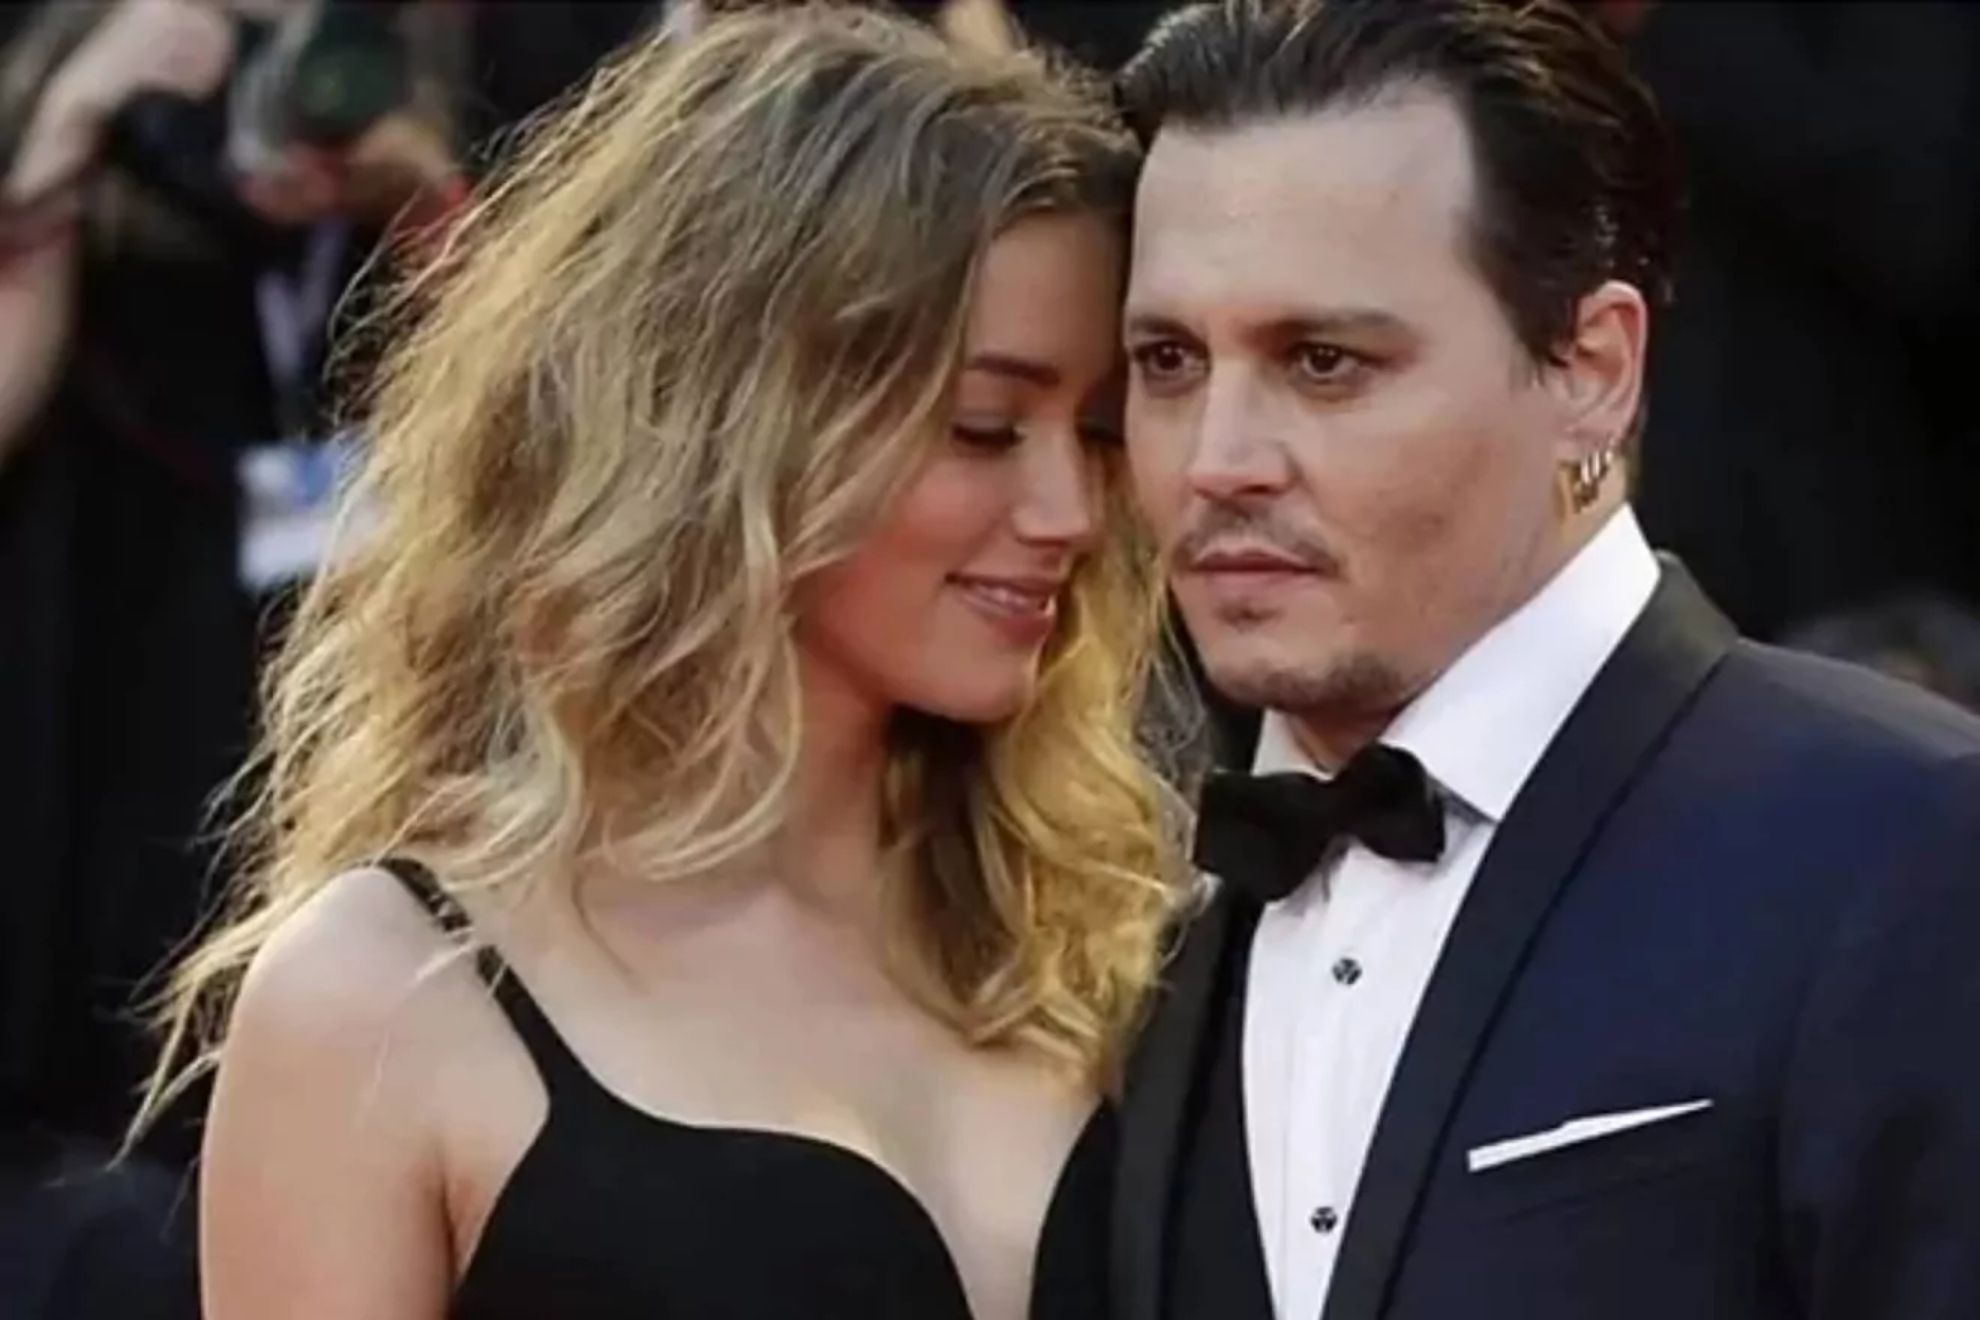 Johnny Depp and Amber Heard when they were married.